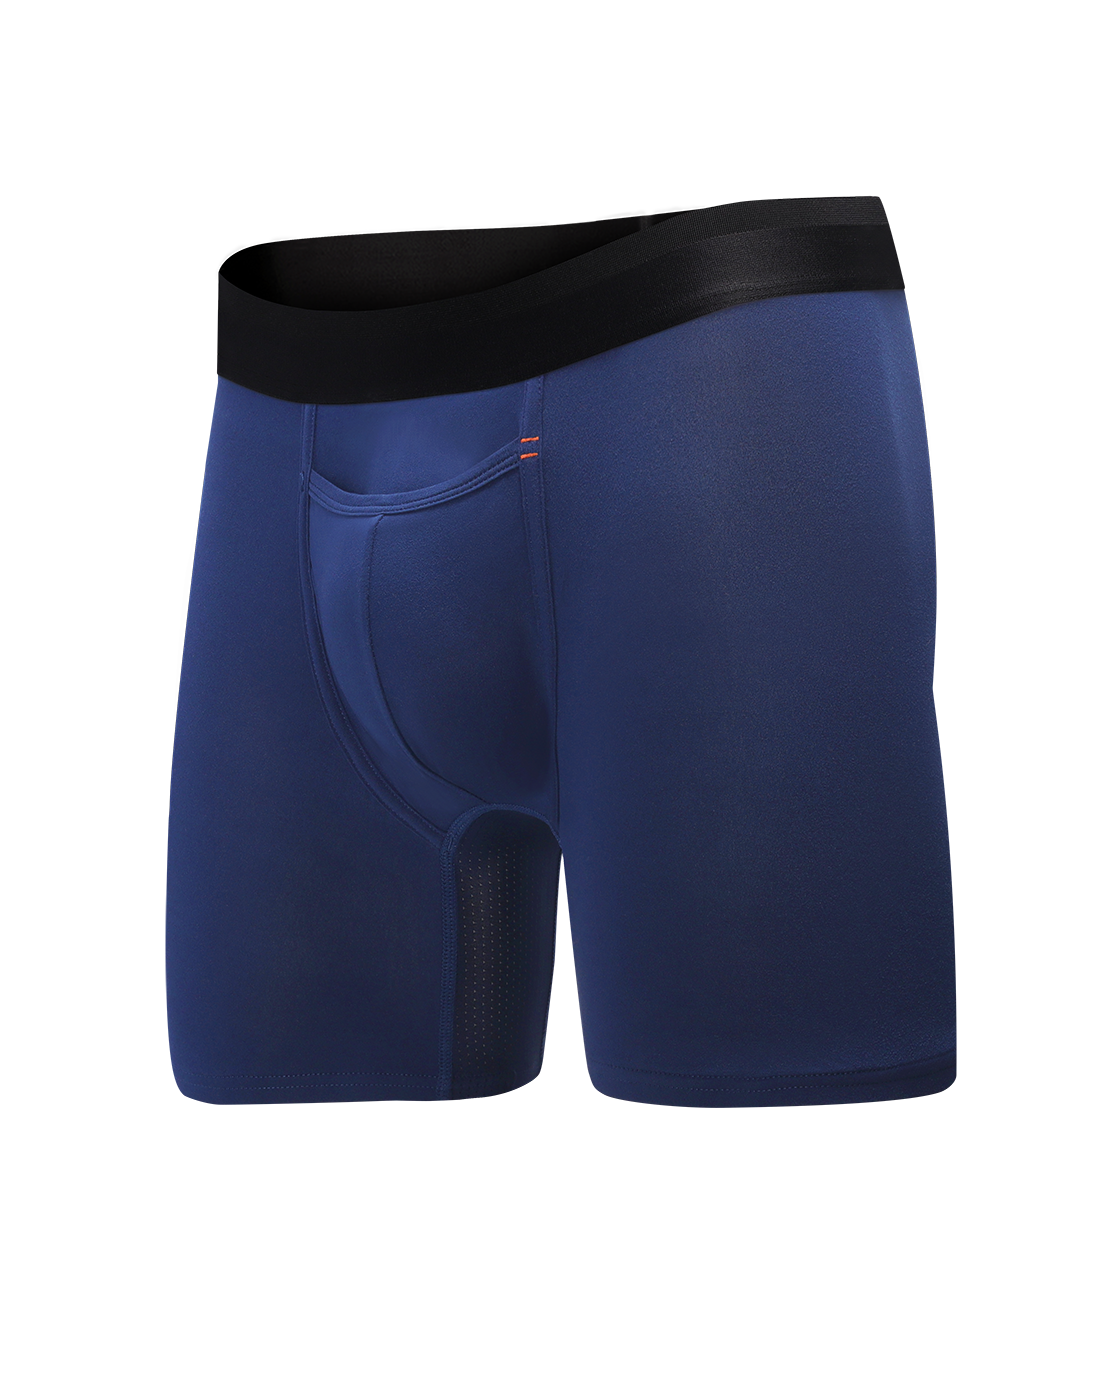 Re:Luxe Classic Boxer Brief - Athletic Fit